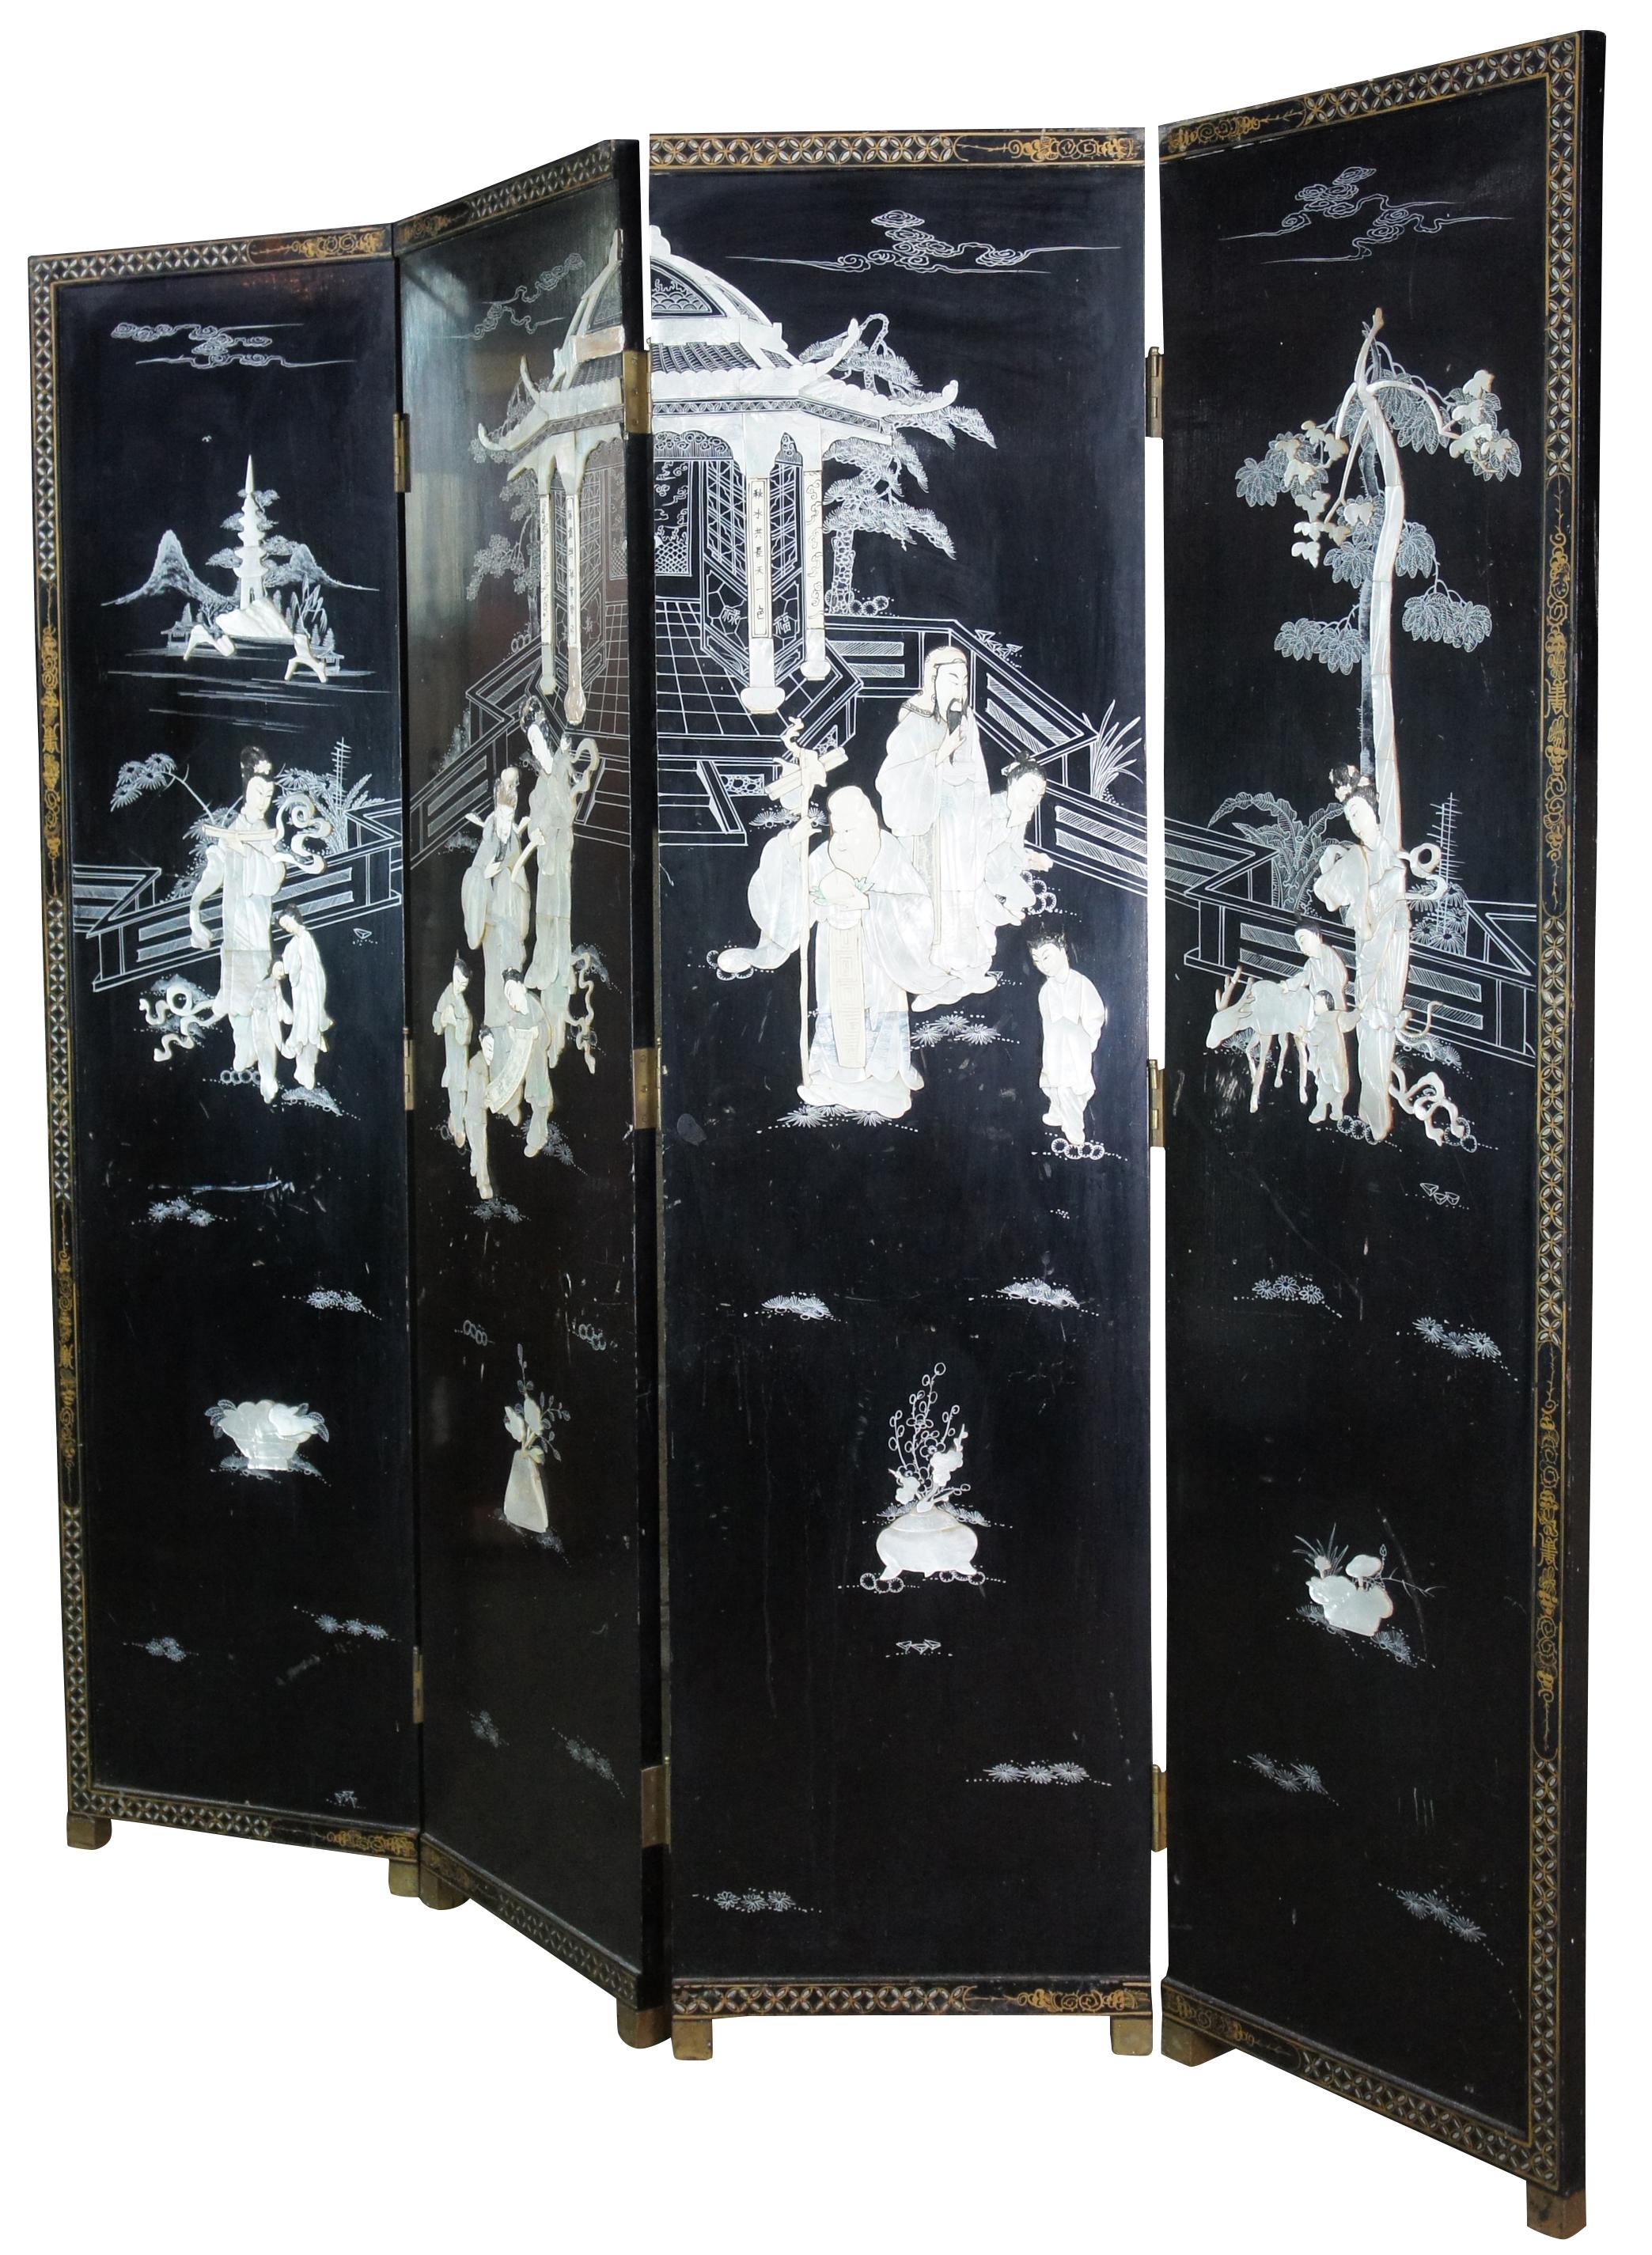 Mid 20th century Chinese four panel wall divider or screen. Made of wood featuring black lacquer with mother of pearl and soapstone landscape screen of geishas with children and animals outside of a pagoda or temple. Accented with decorative gold